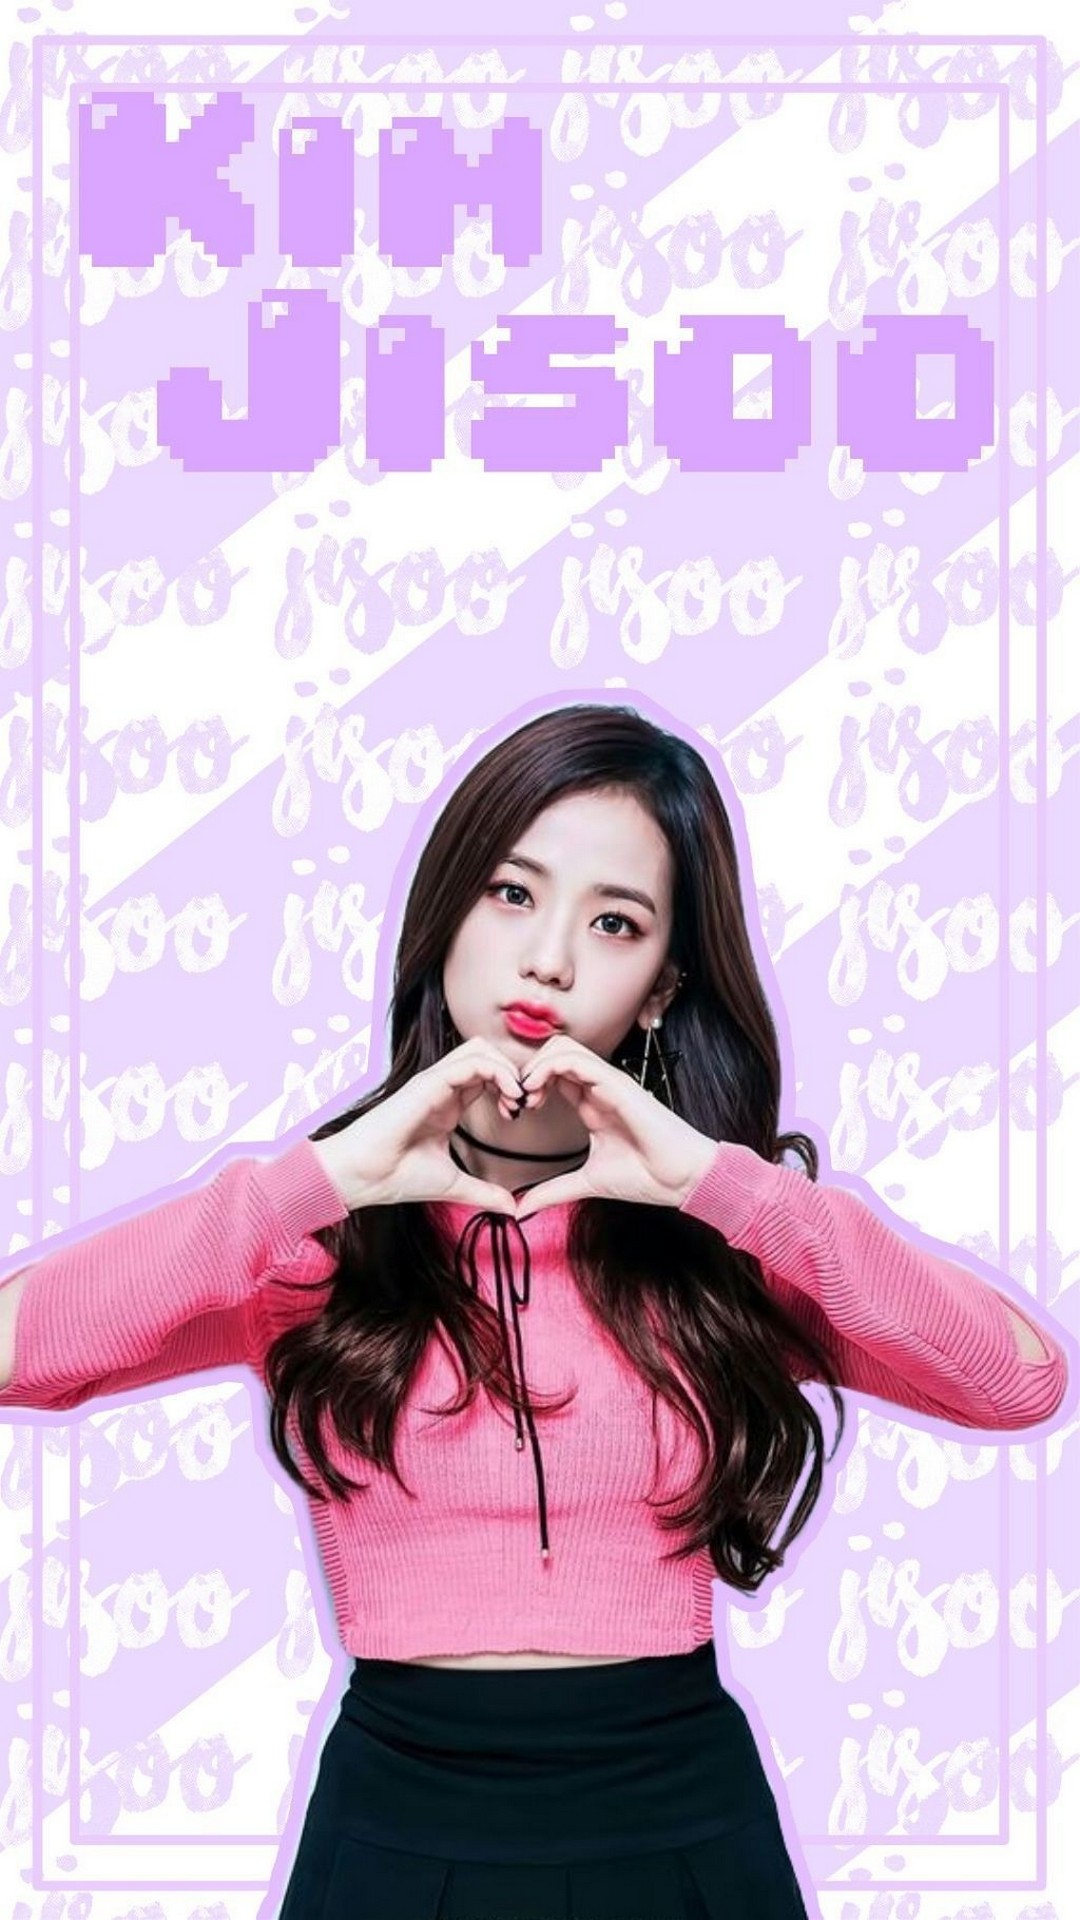 Jisoo Blackpink iPhone Wallpaper in HD with high-resolution 1080x1920 pixel. You can set as wallpaper for Apple iPhone X, XS Max, XR, 8, 7, 6, SE, iPad. Enjoy and share your favorite HD wallpapers and background images